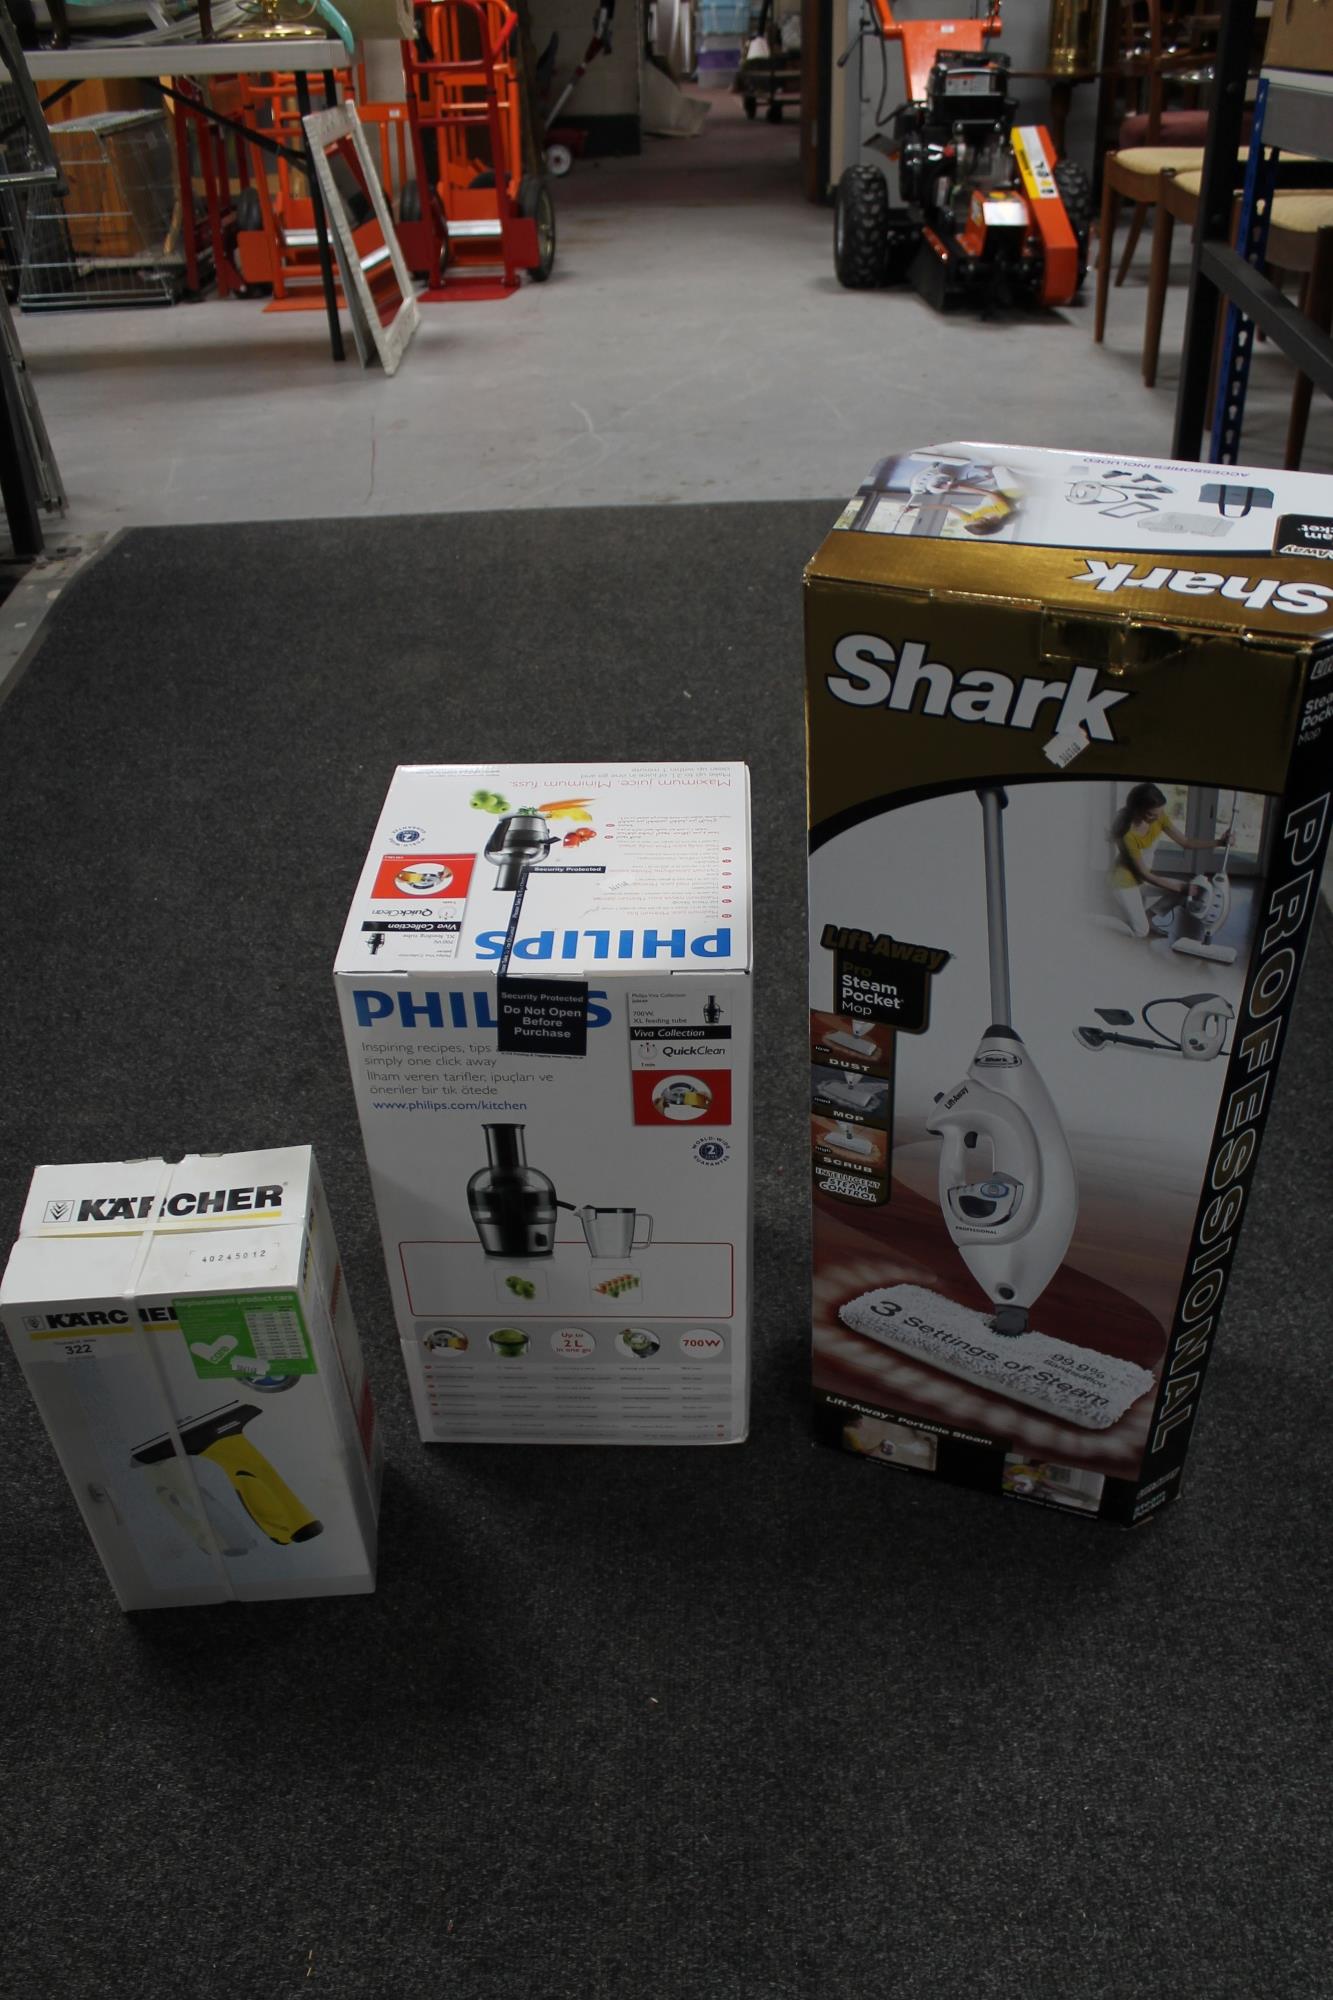 A Shark professional steam cleaner,